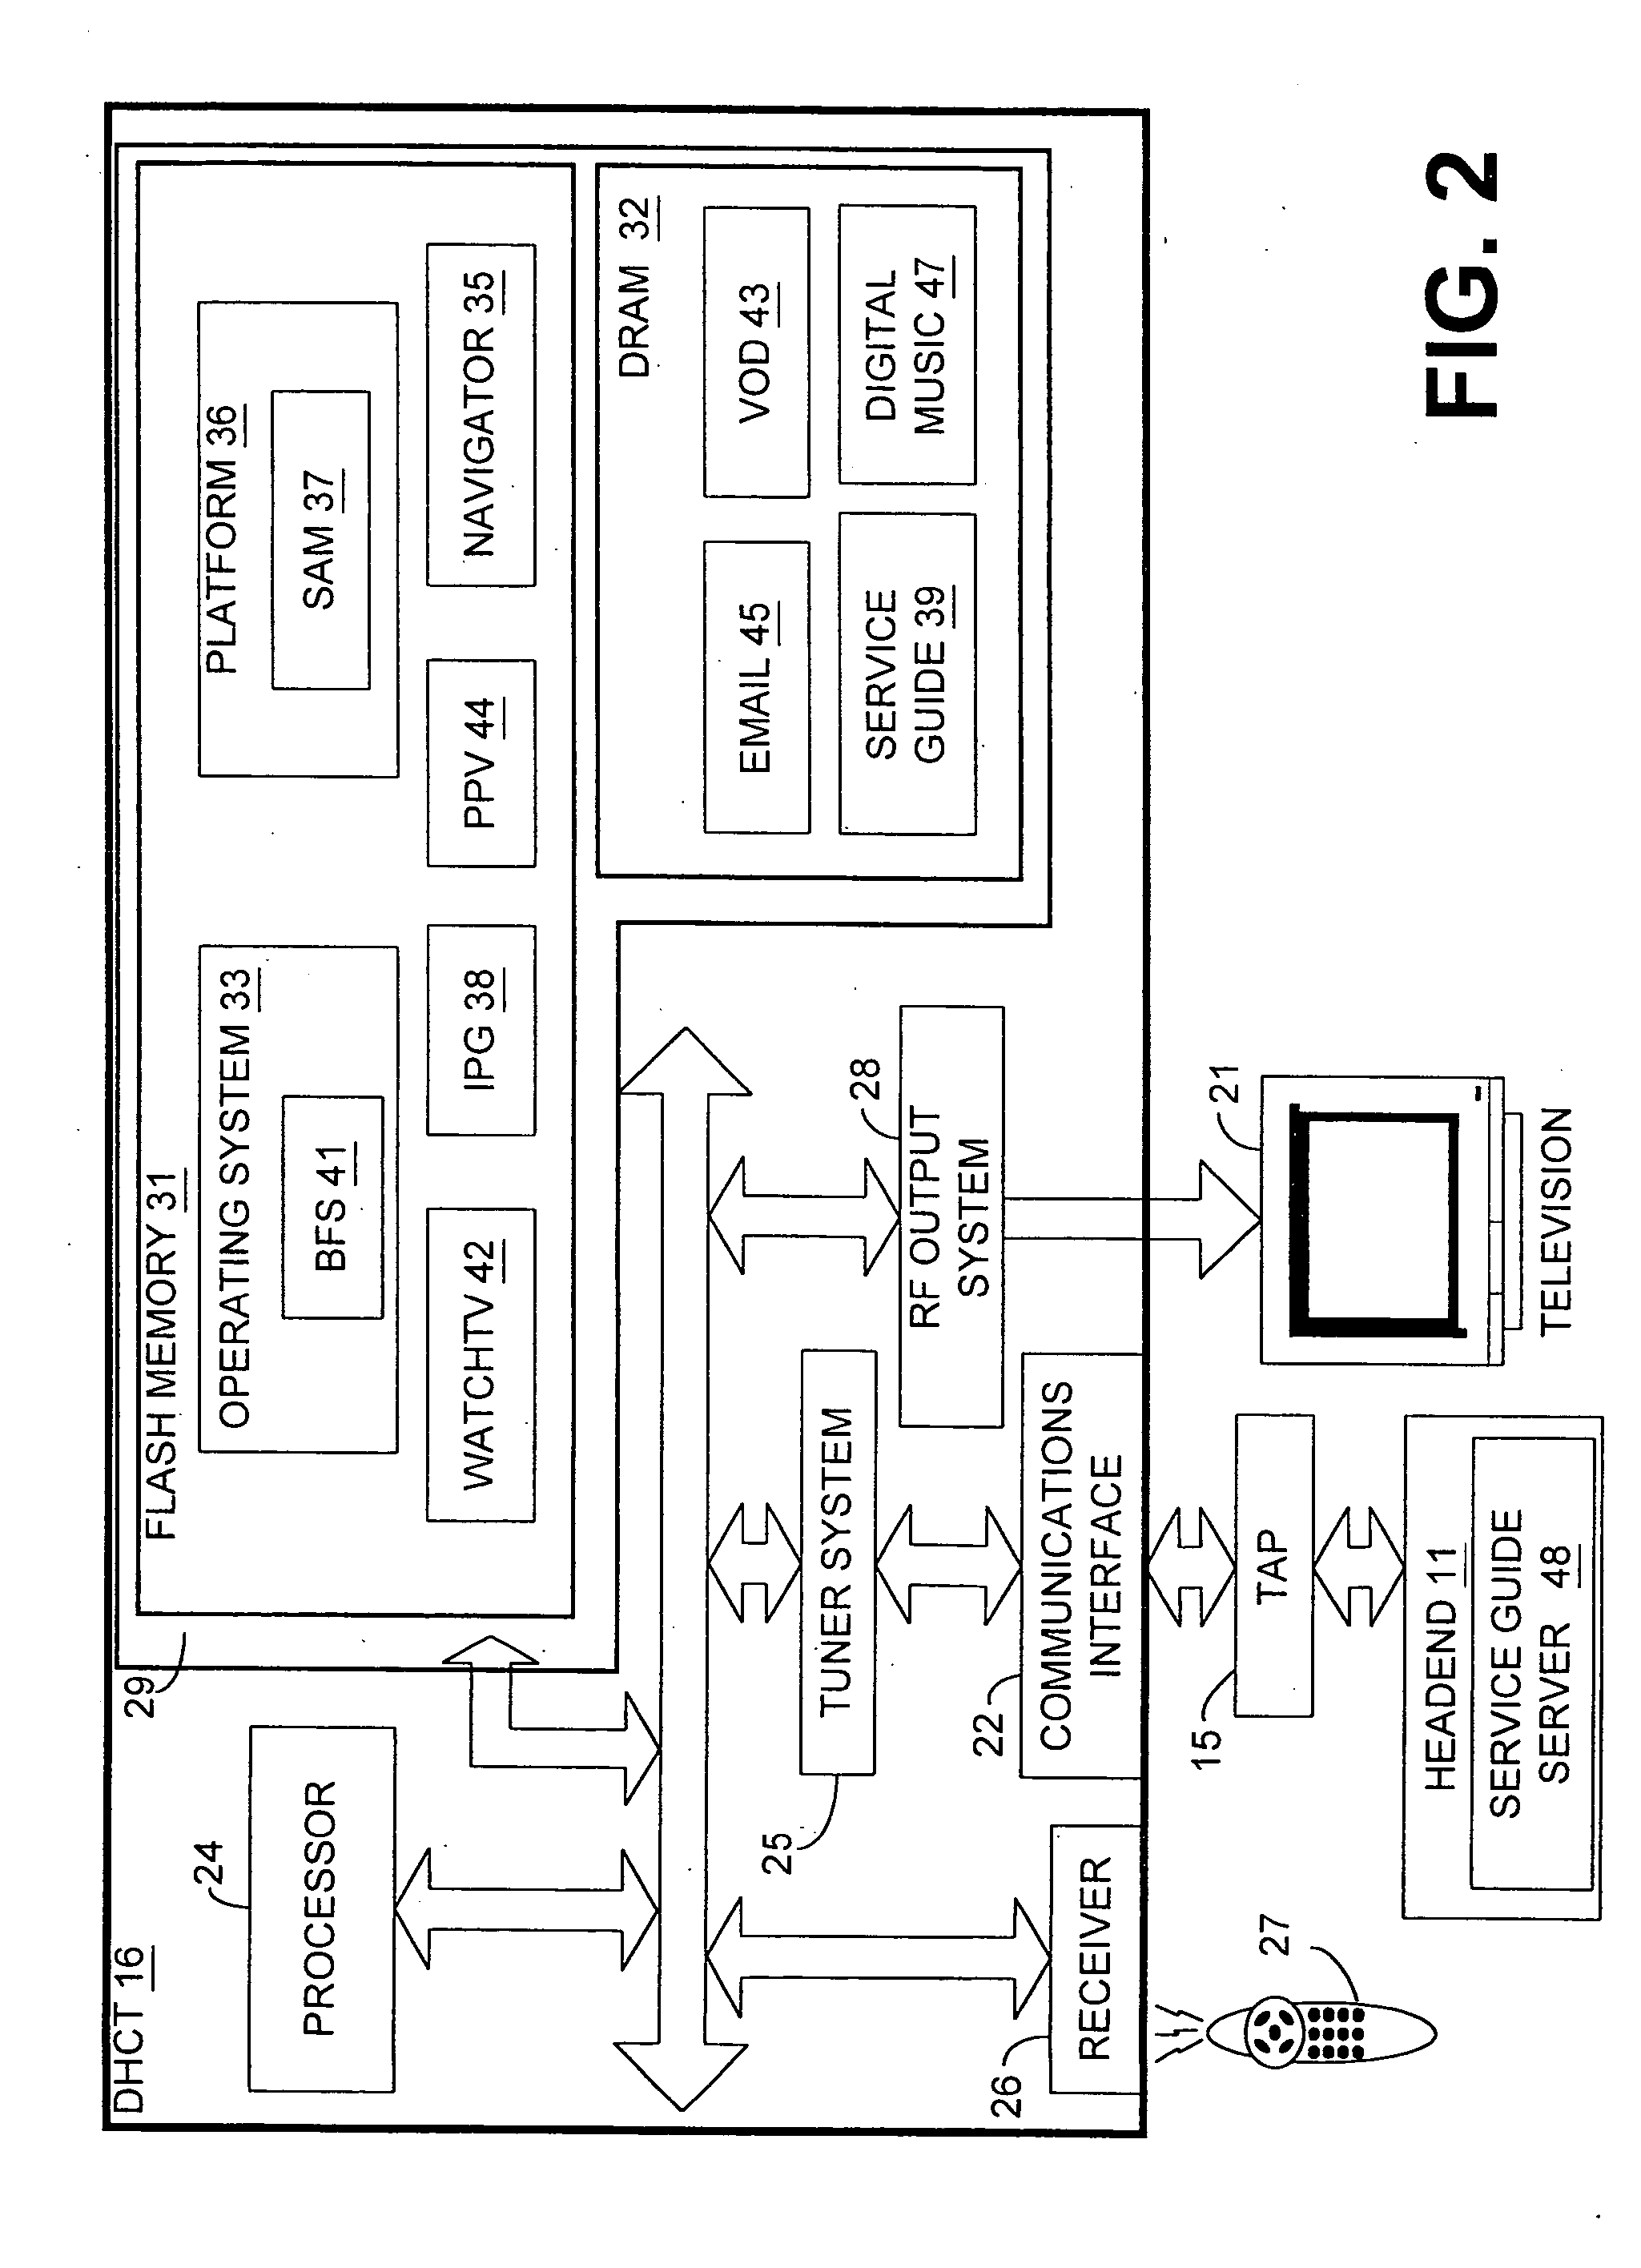 User input for access to television services